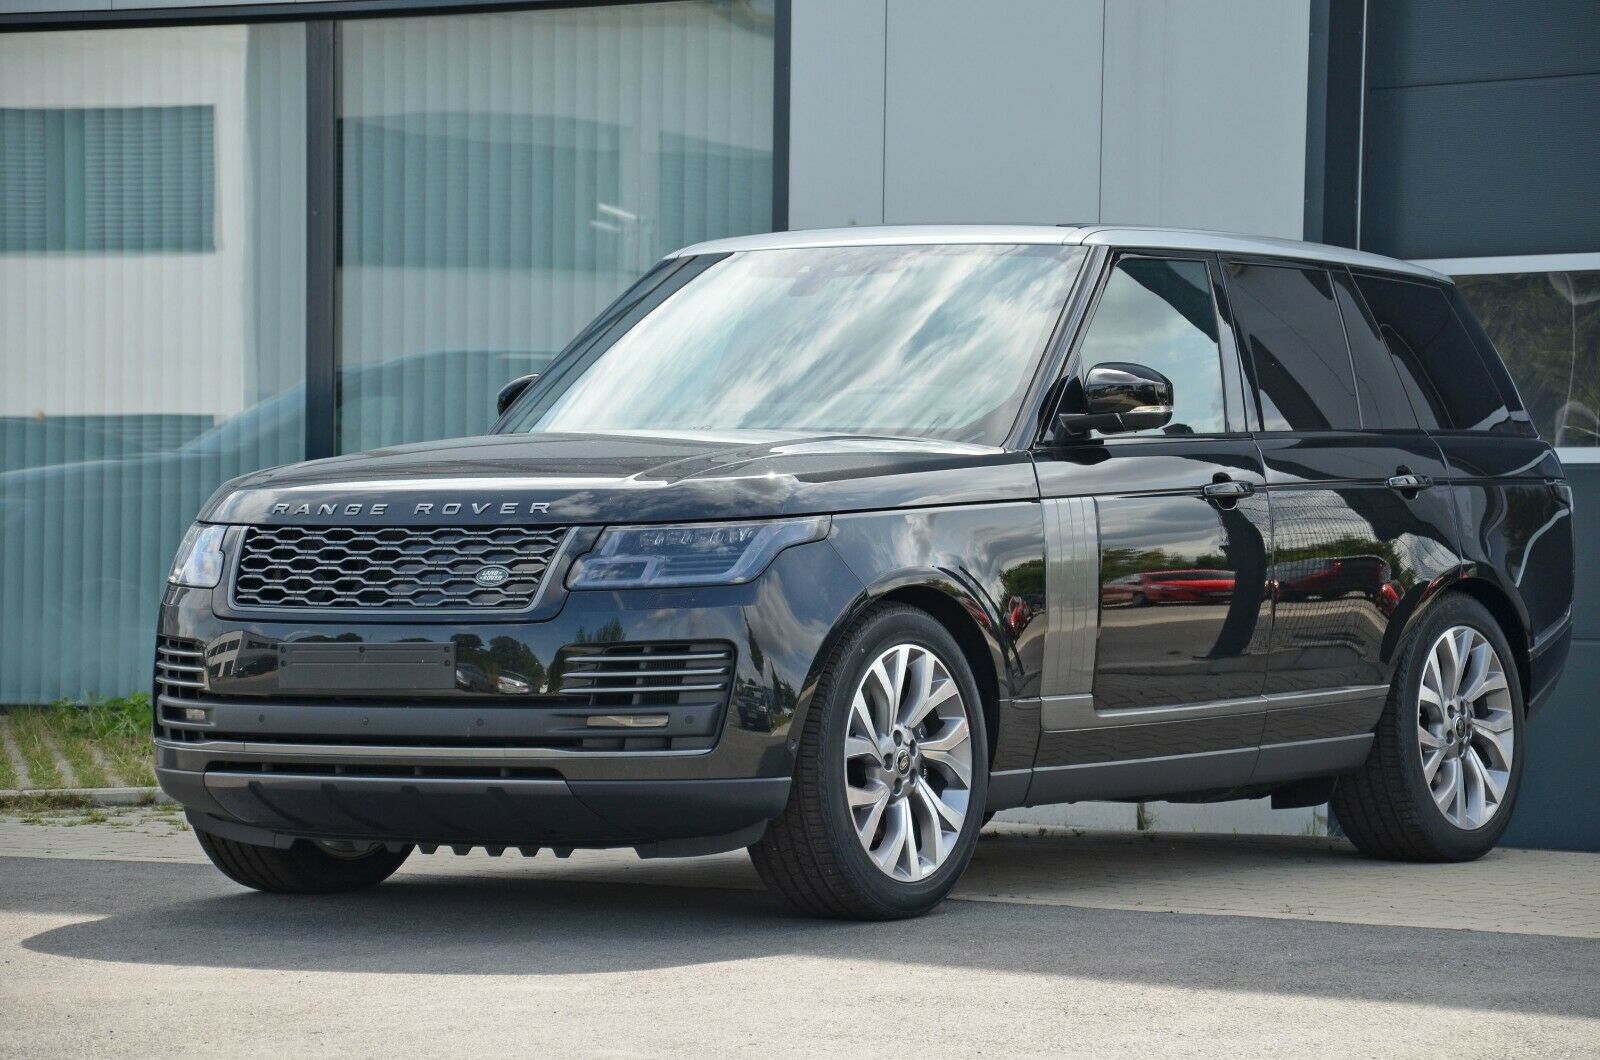 Black Range Rover from the front.